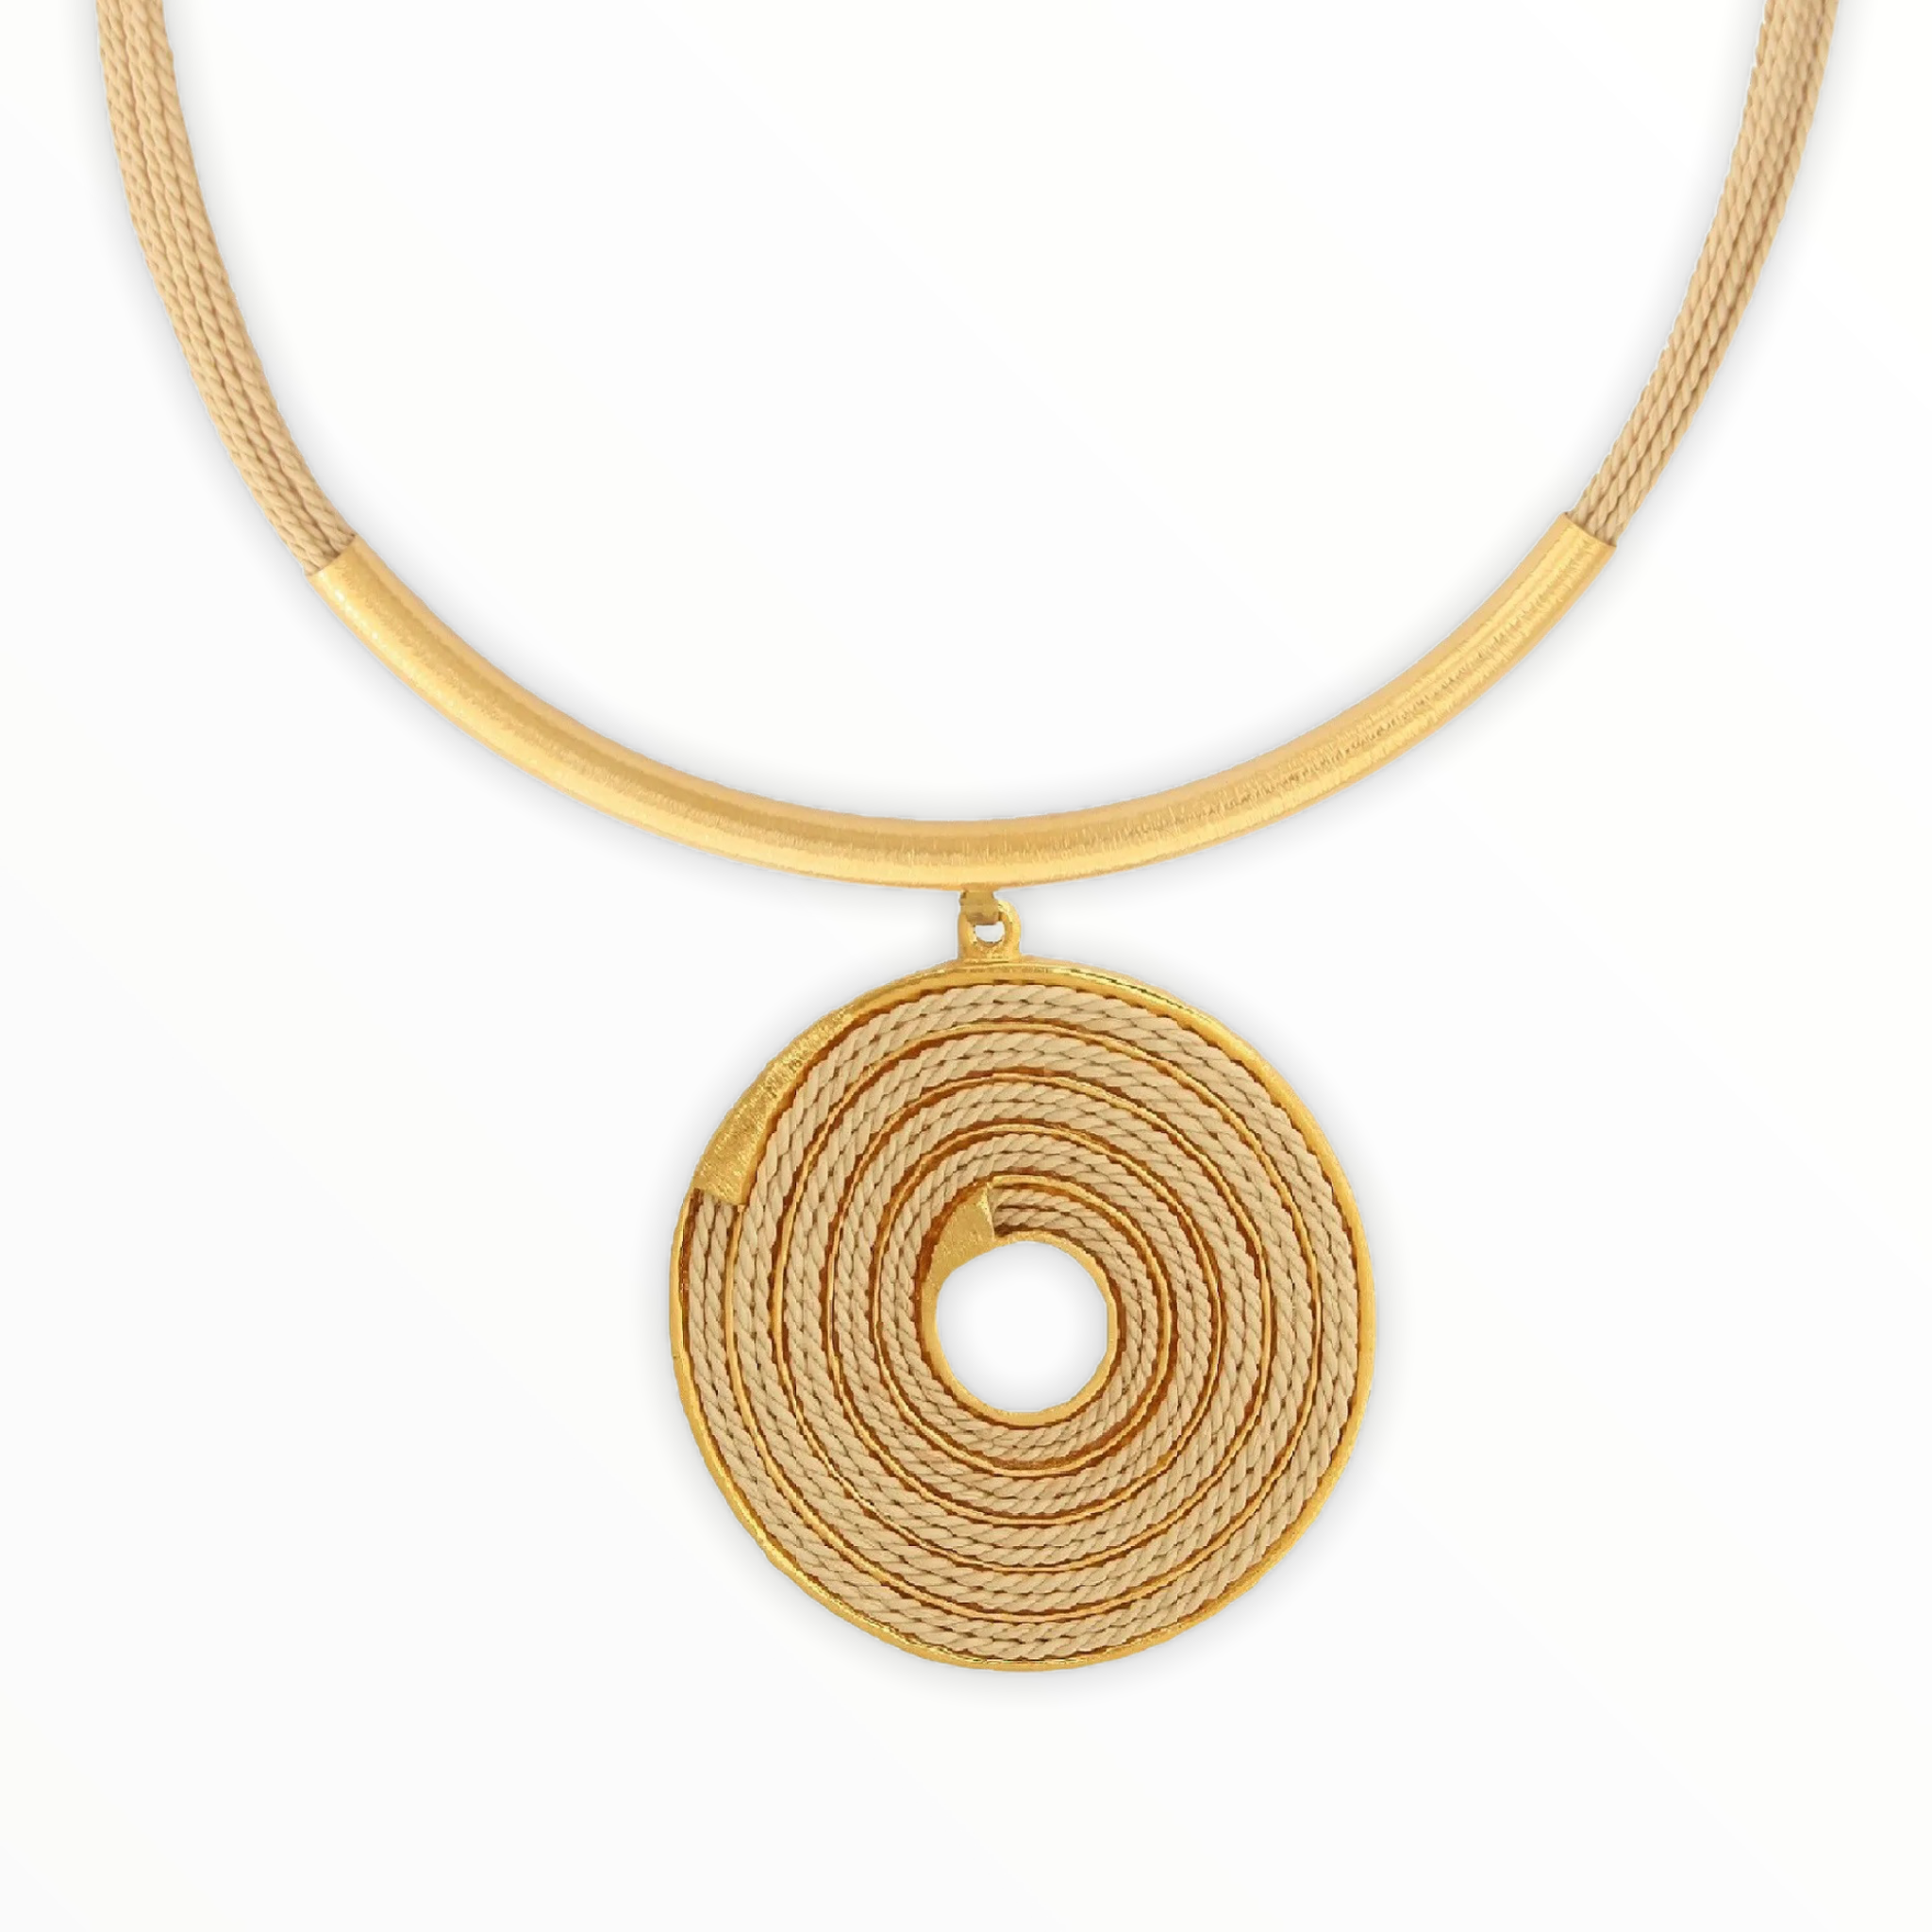 Necklace “Circle Collection” Treasures of Brazil